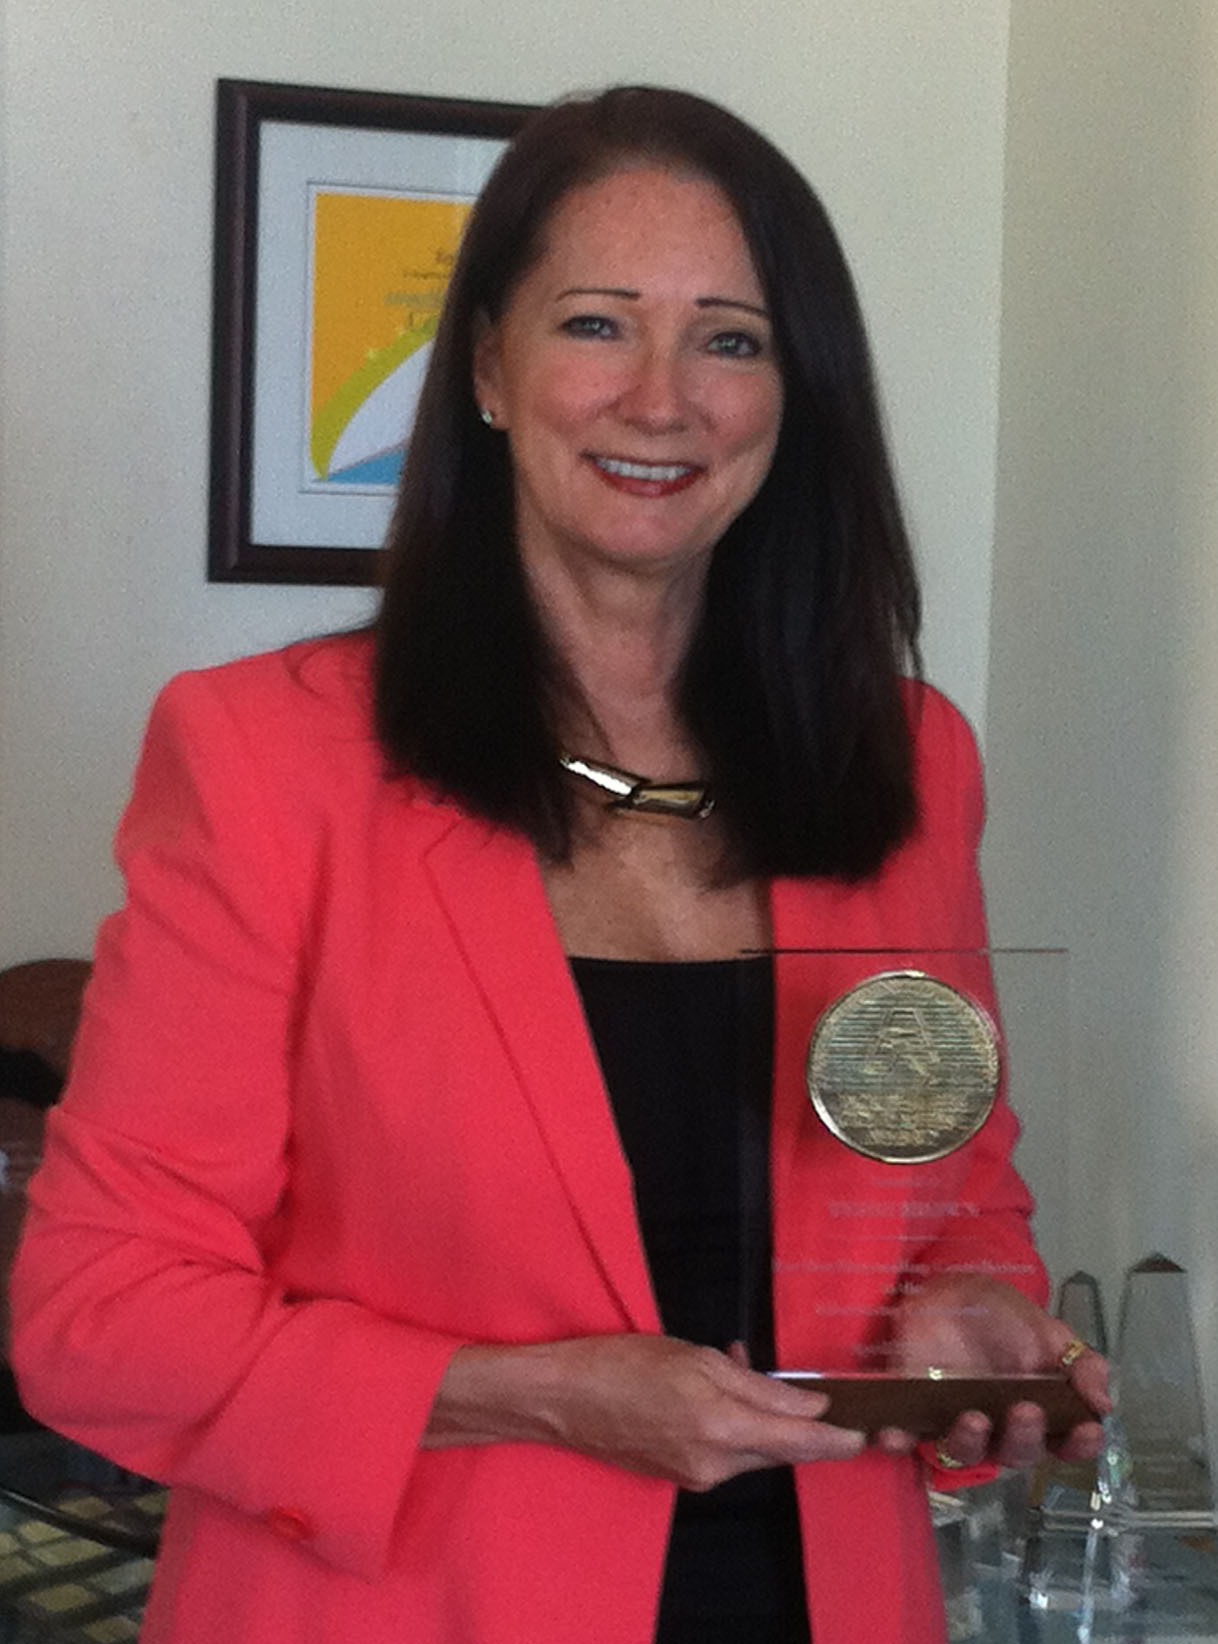 Terri Brown Awarded Gold Medal by American Advertising Federation